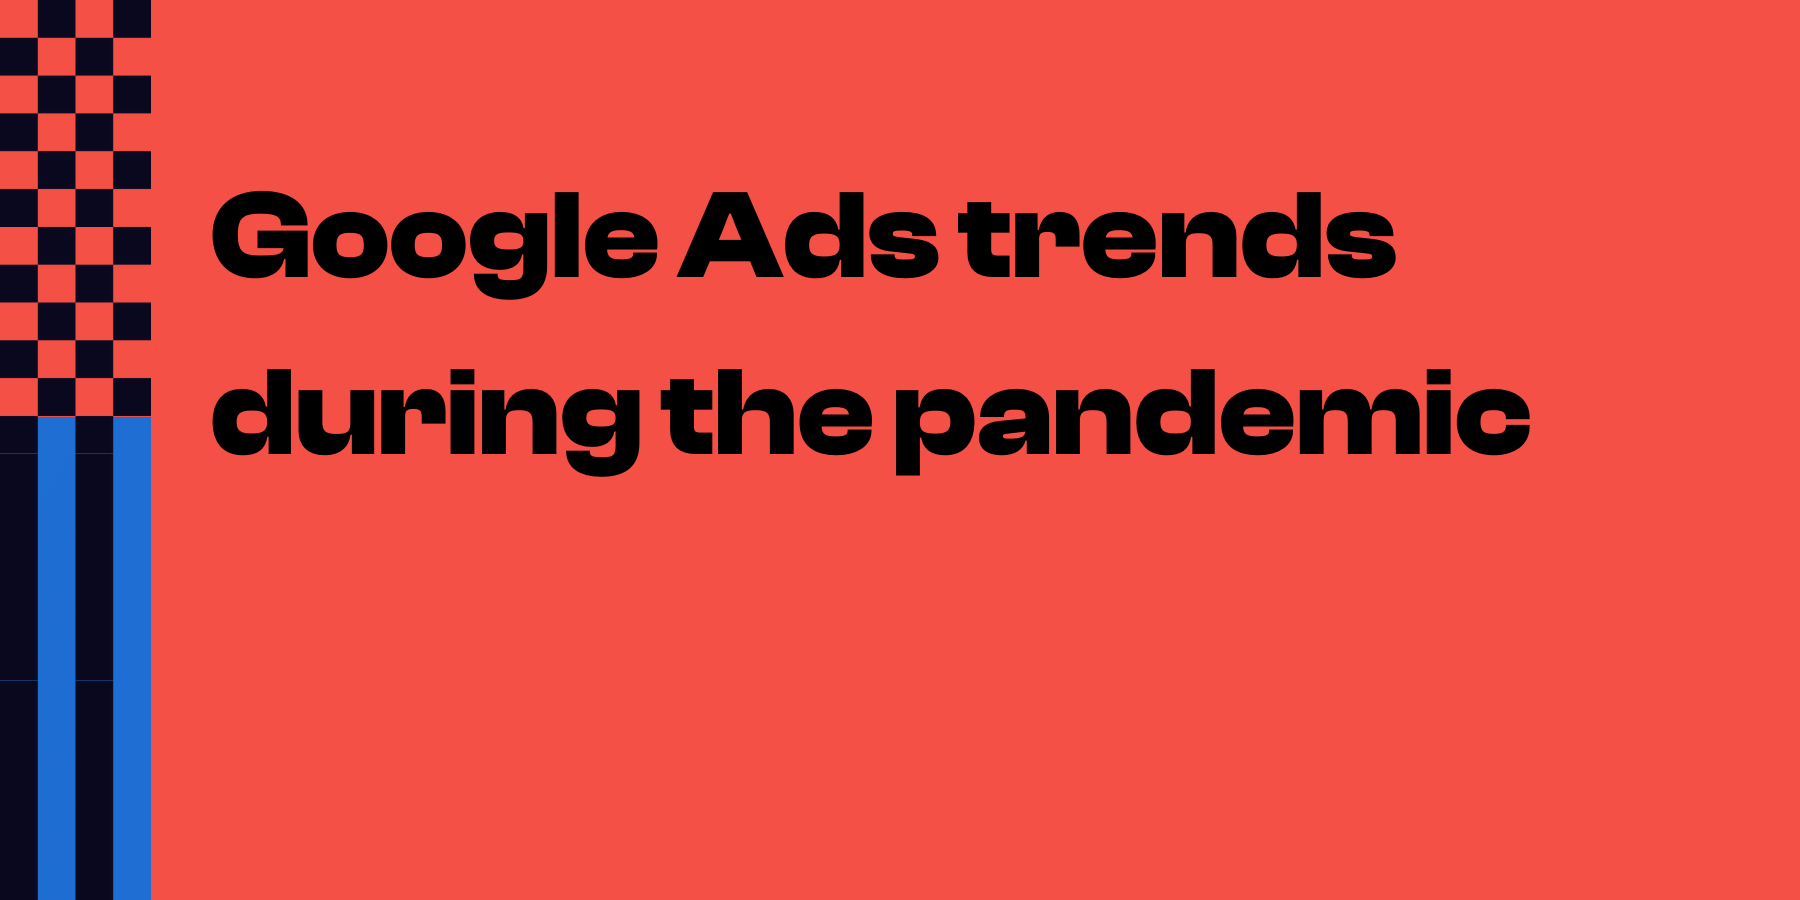 Google Ads trends during the pandemic 